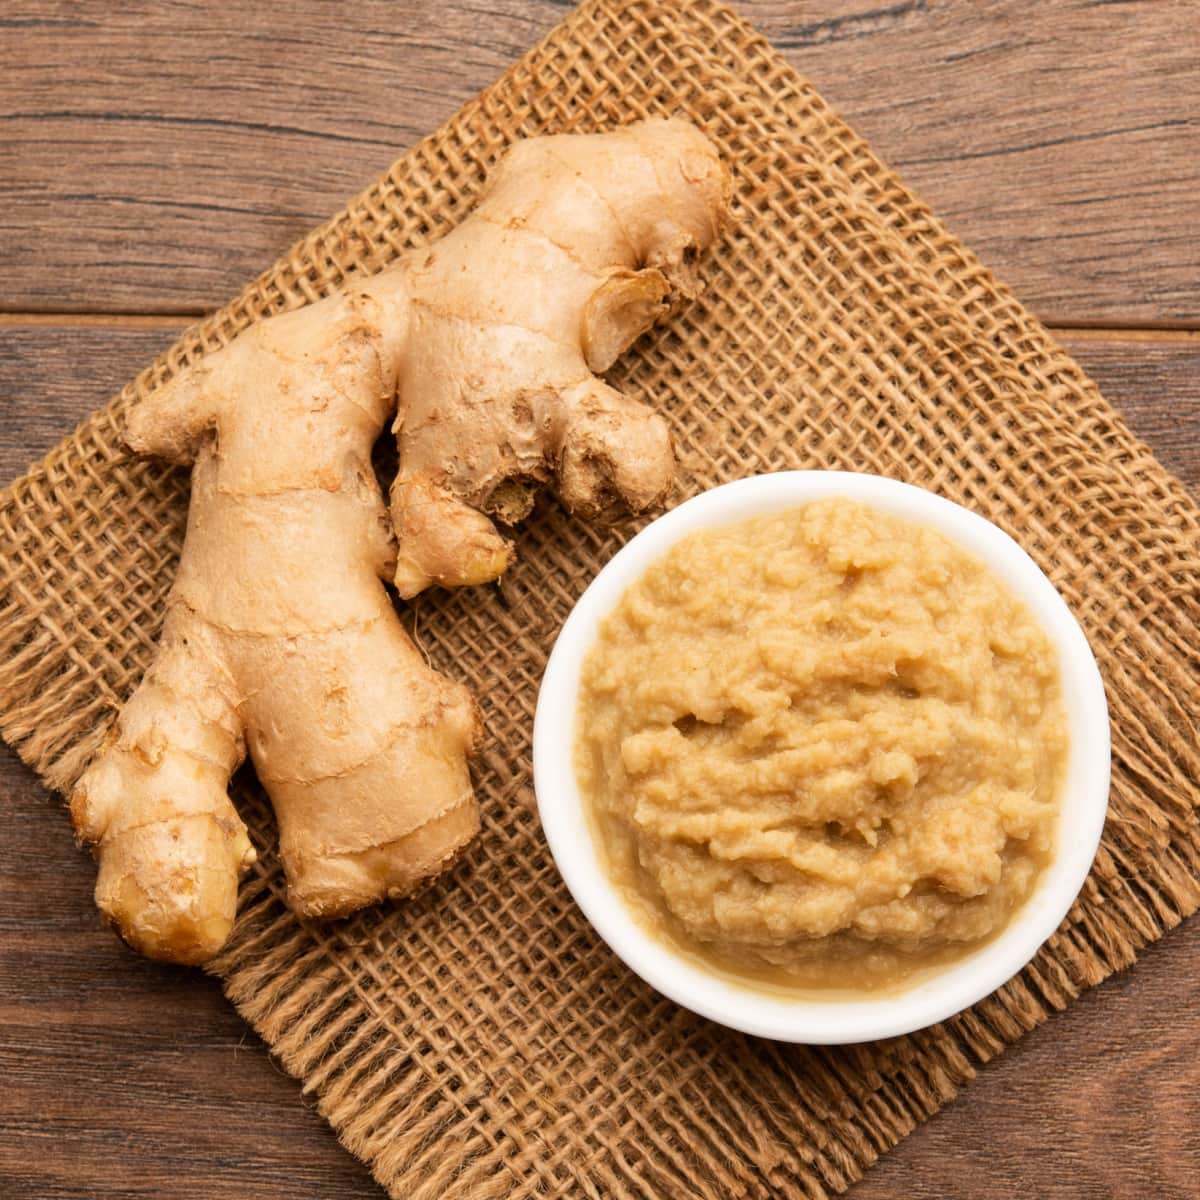 Ginger Whole Next to Ginger Paste on a Woven Cloth on a Wooden Table